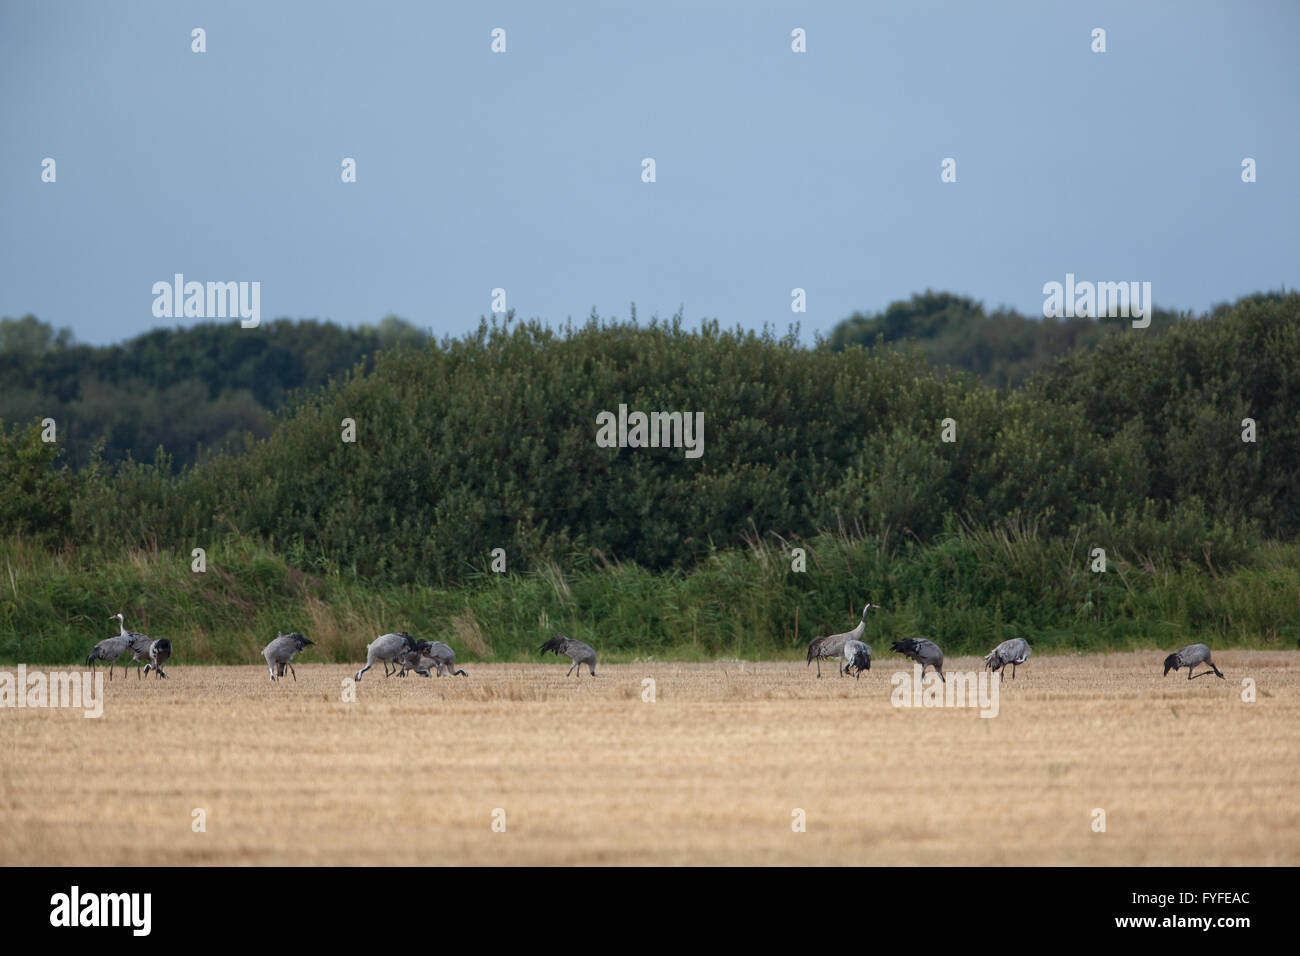 Common or Eurasian Cranes (Grus grus). Gleaning wheat grain. Feeding from recently harvested cereal field. Waxham. Norfolk. East Stock Photo